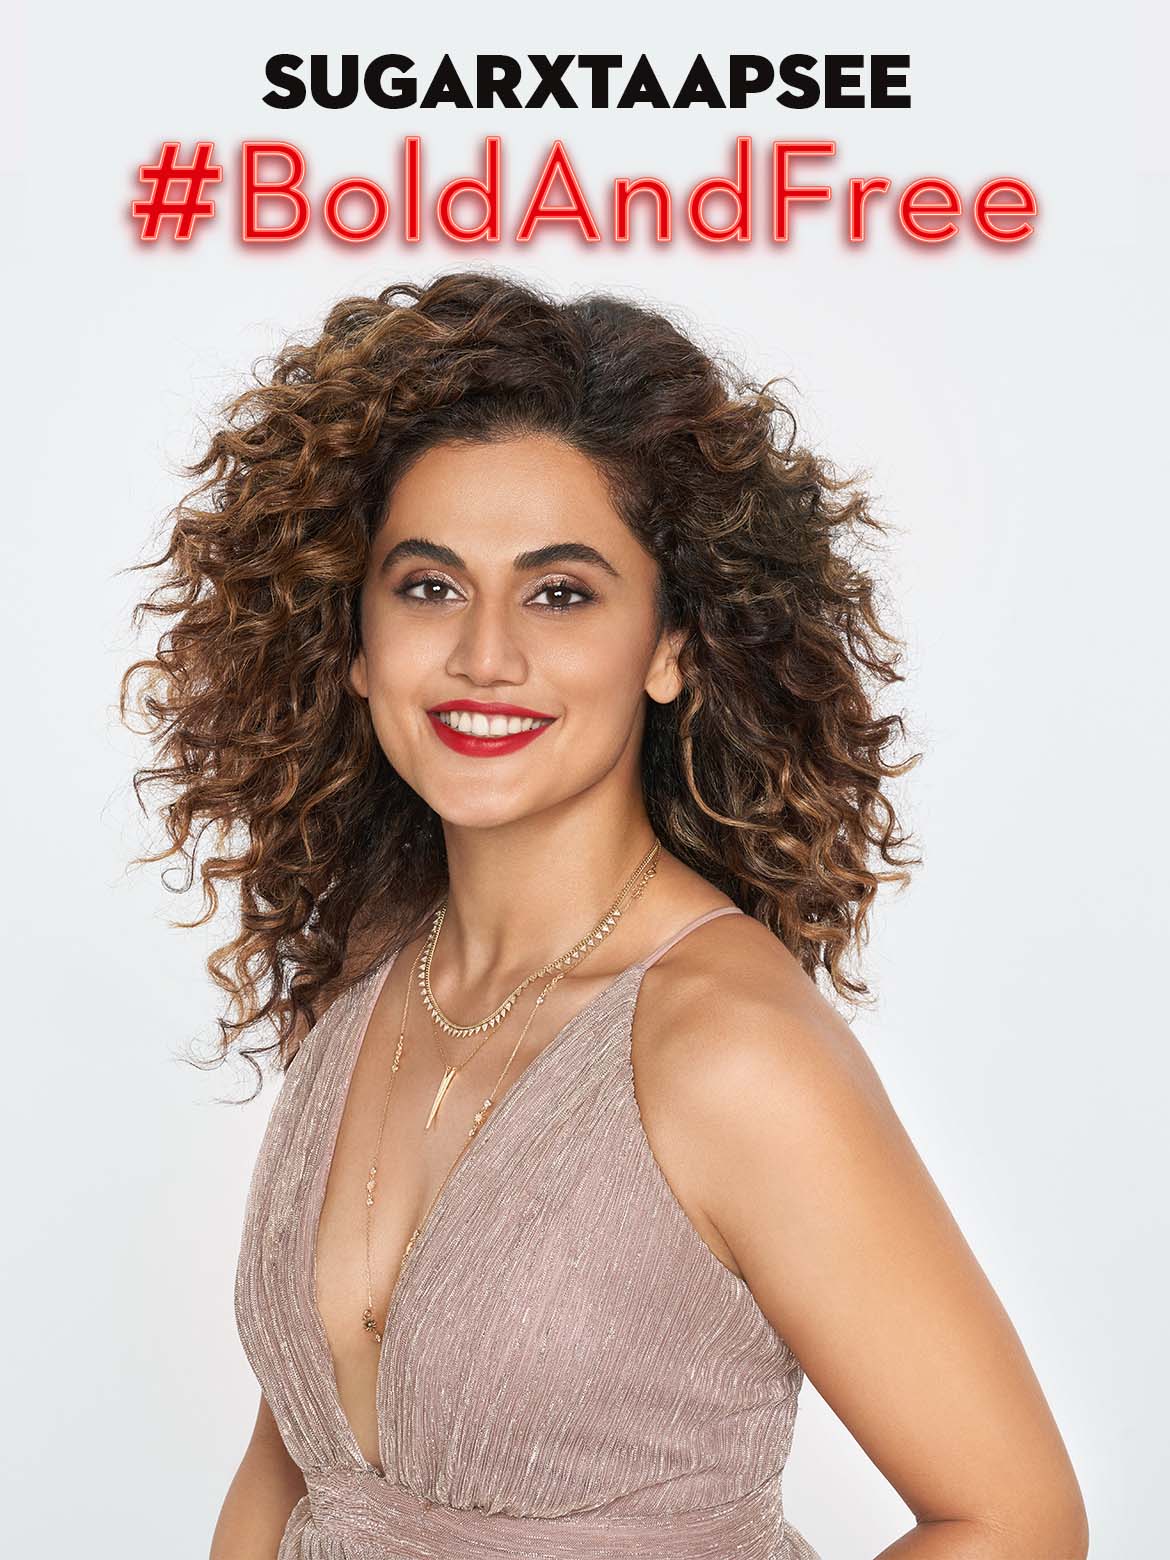 Taapsee Pannu Xxx V - Taapsee Pannu Sizzles As The Face Of SUGAR's New Campaign #BoldAndFree |  SUGAR Cosmetics